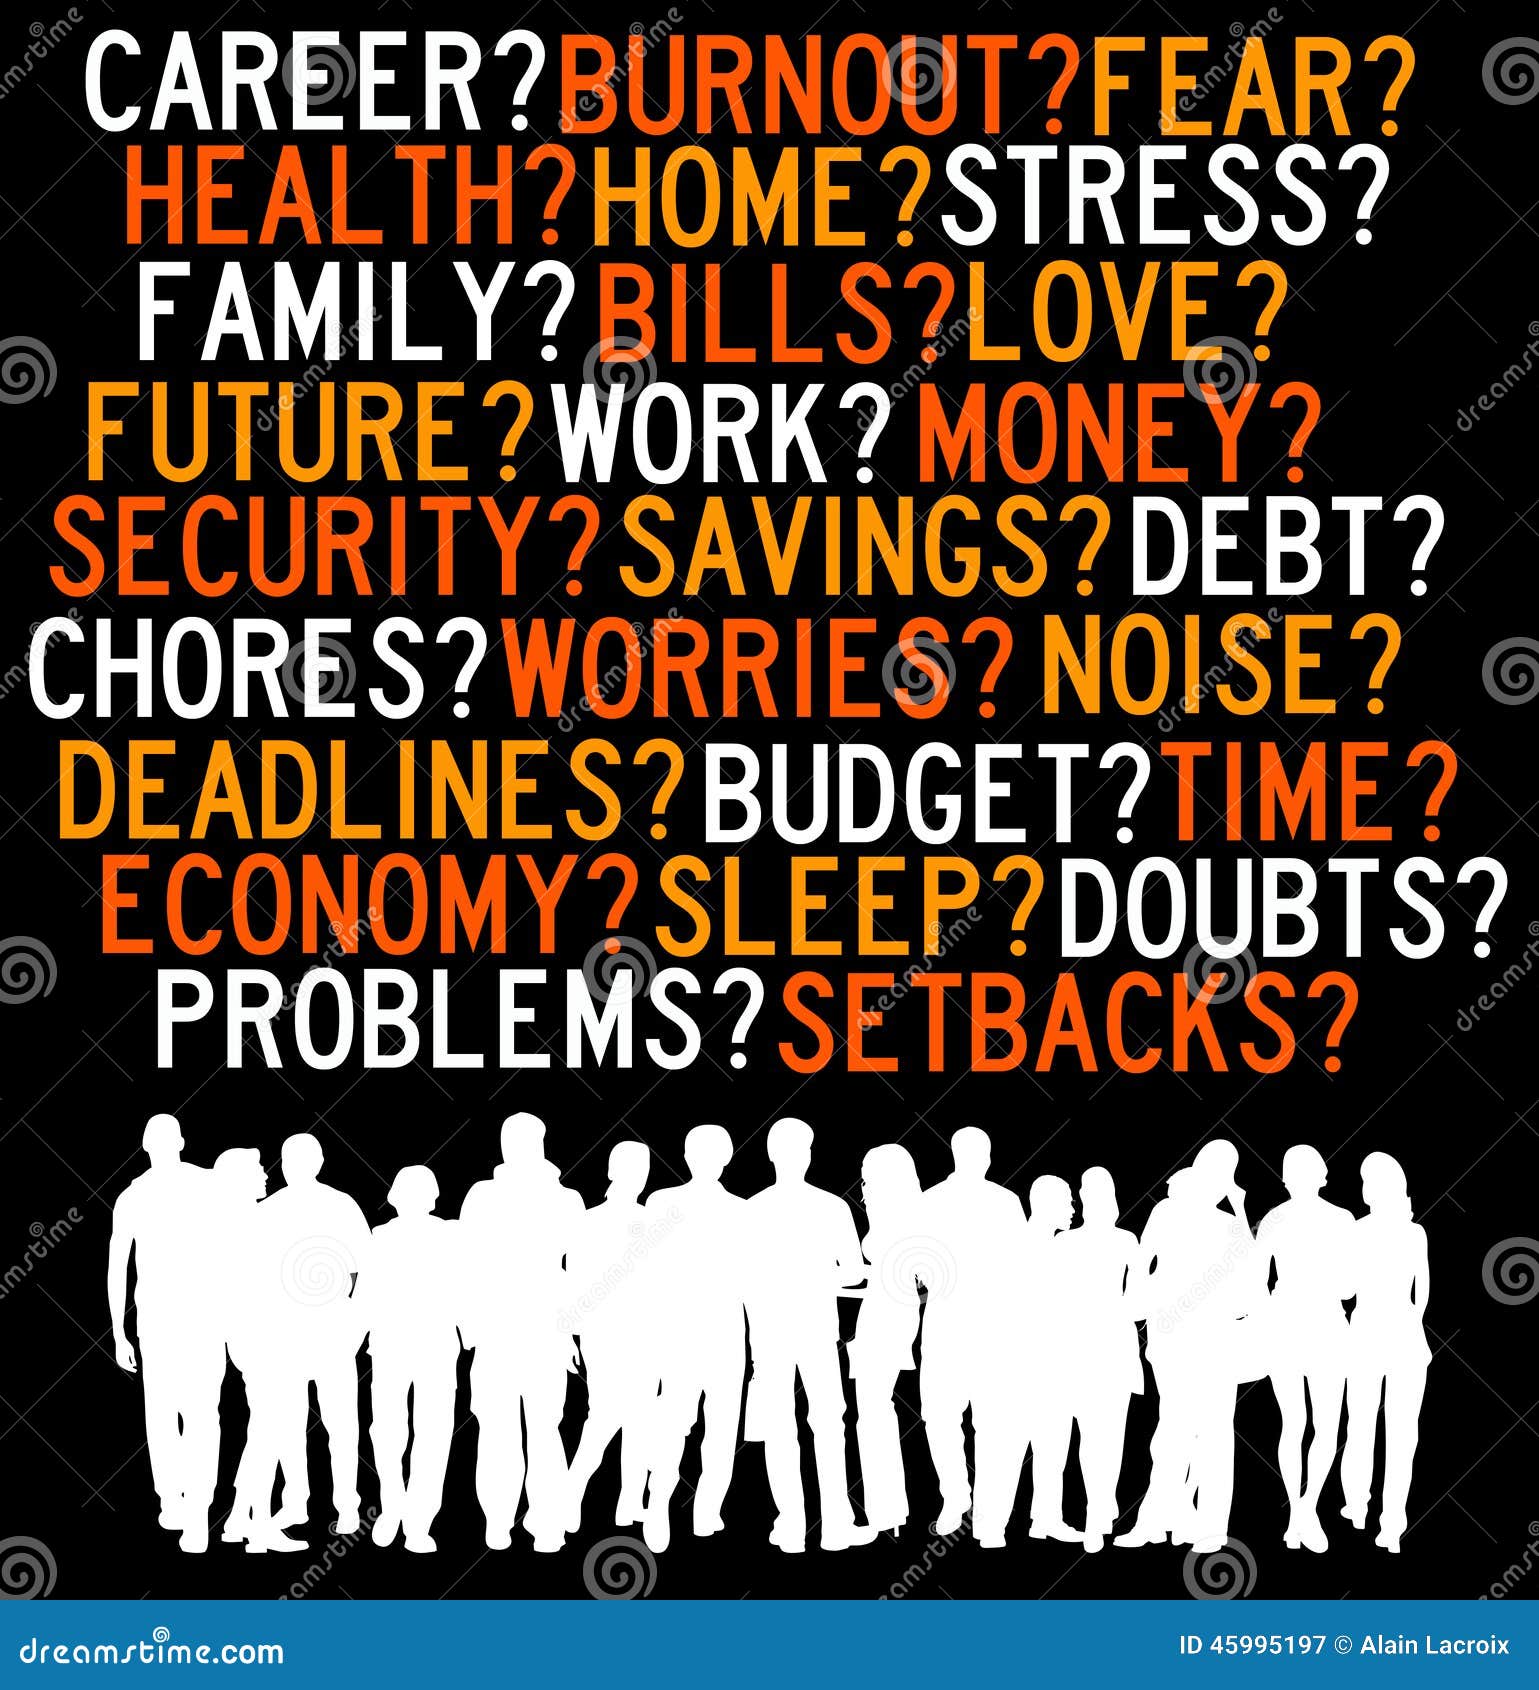 list of problems in our society